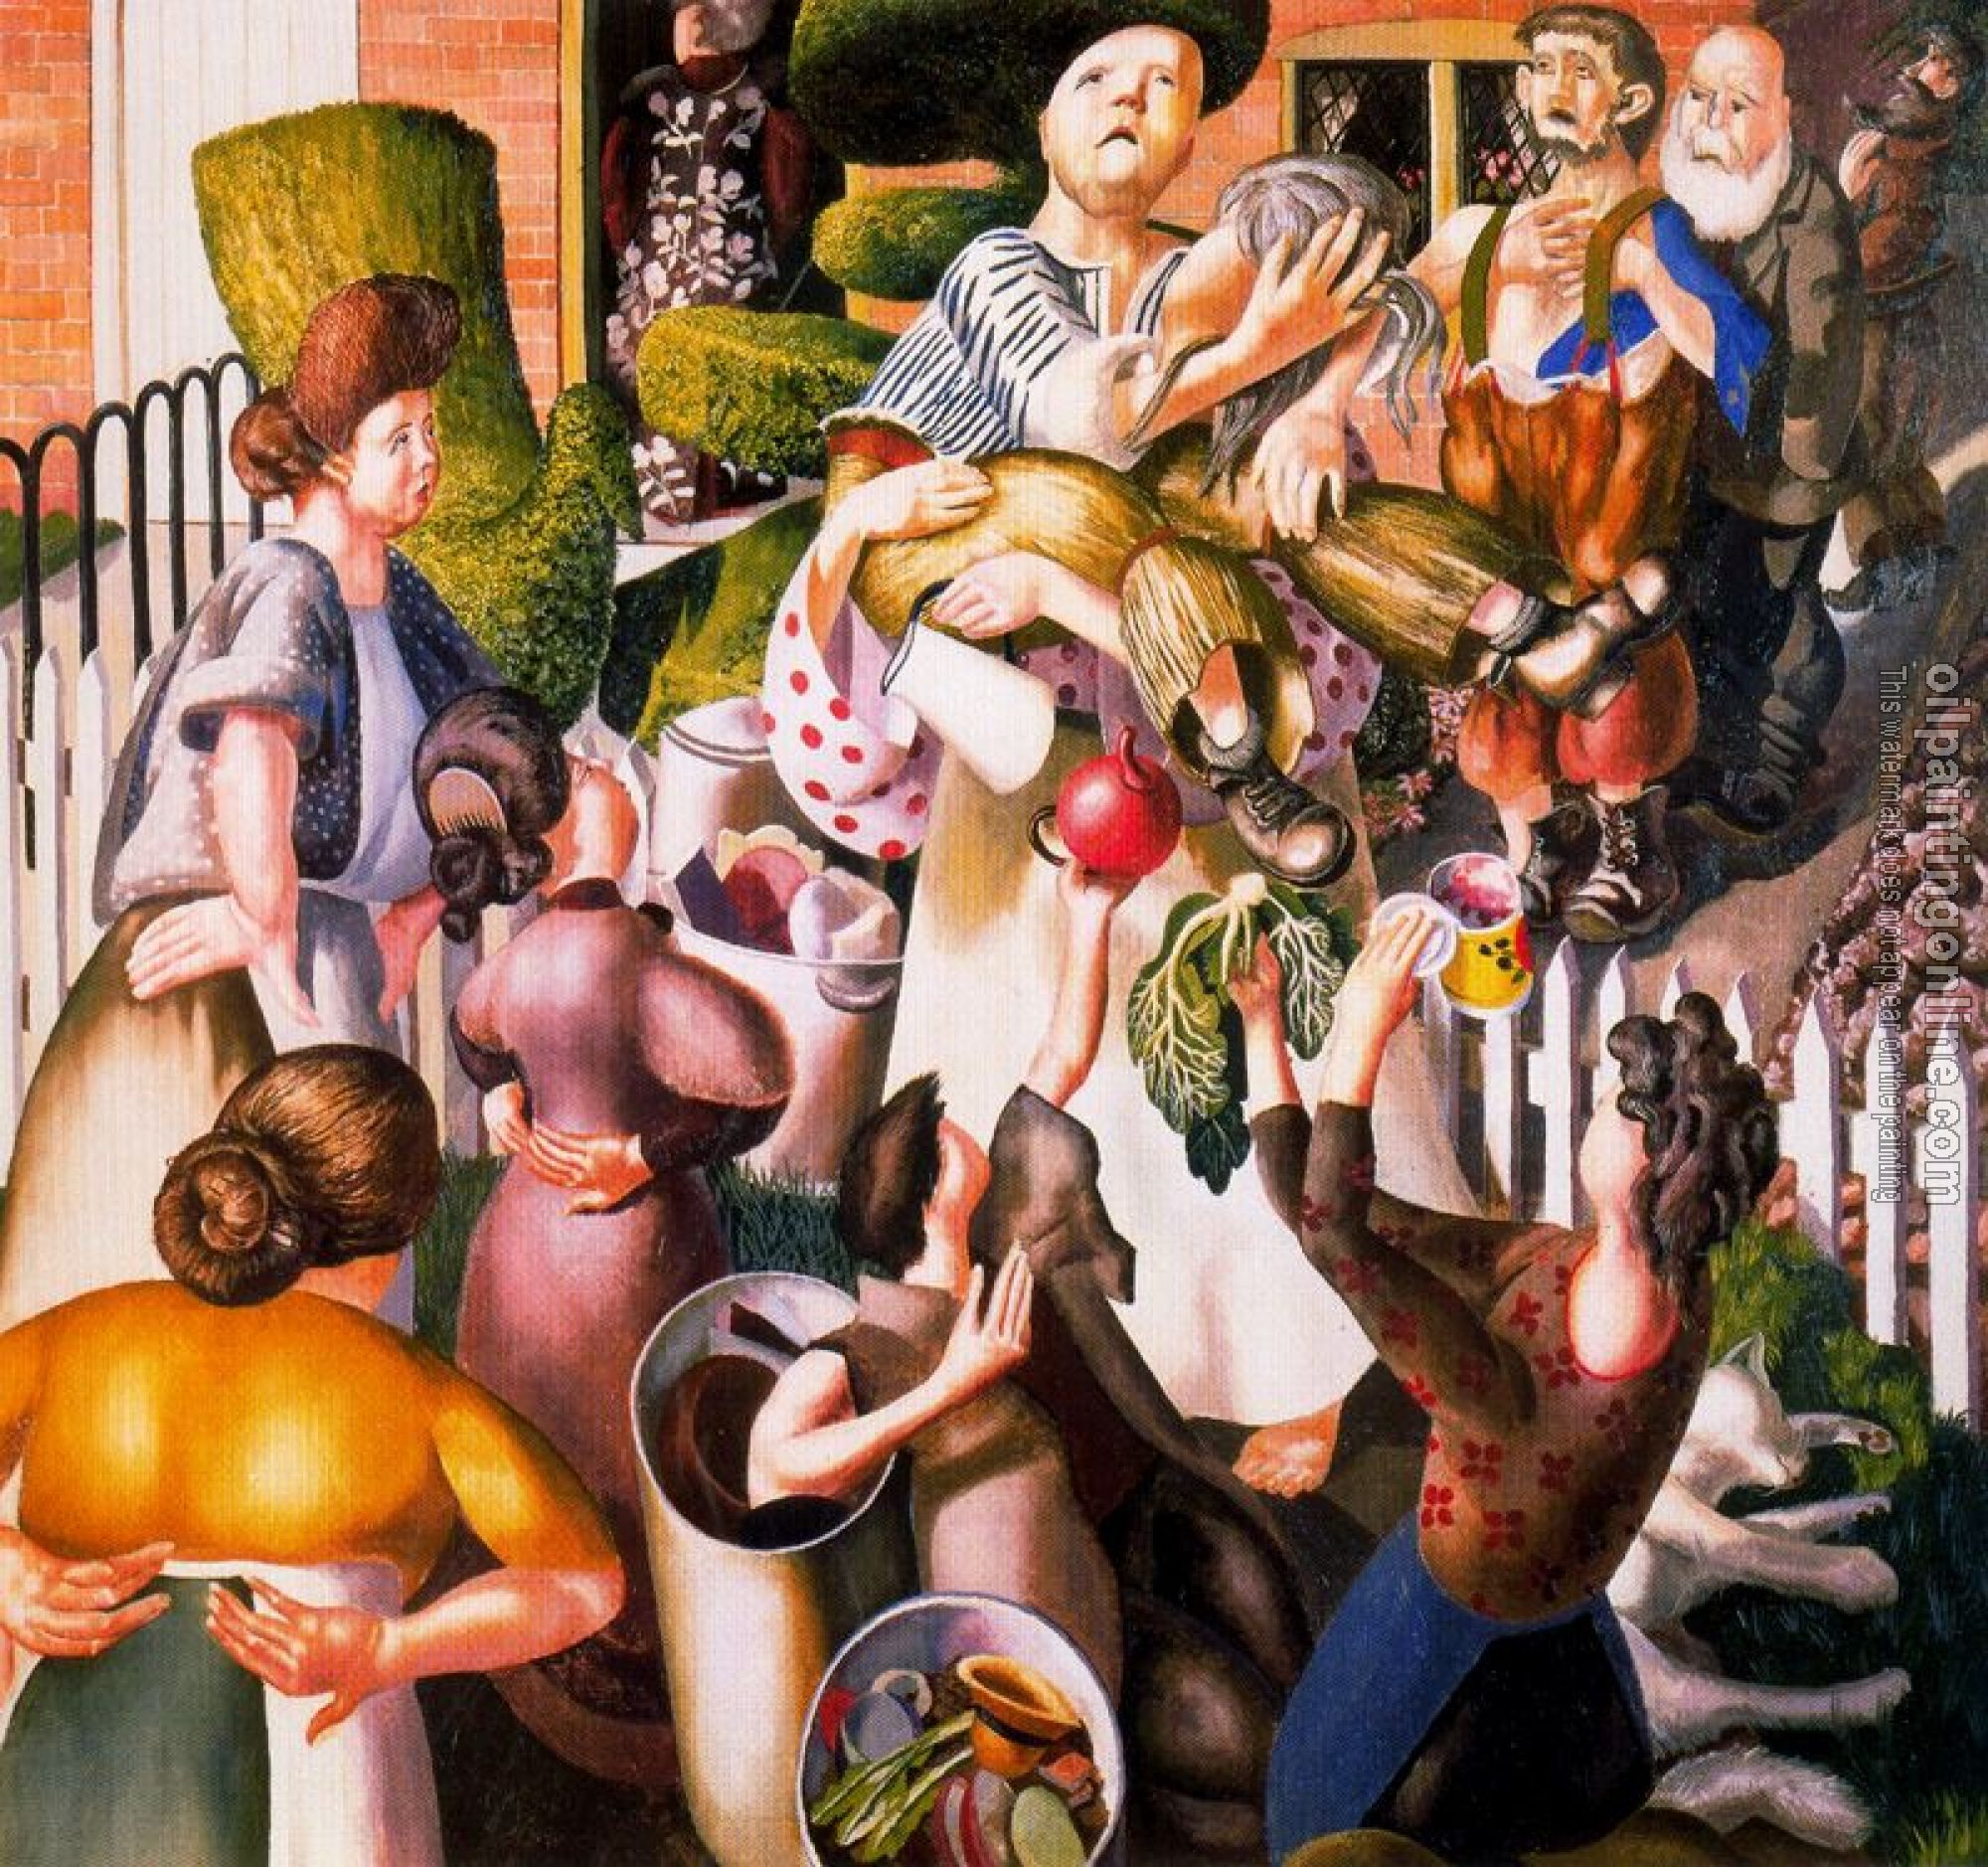 Stanley Spencer - The Dustman or the Lovers